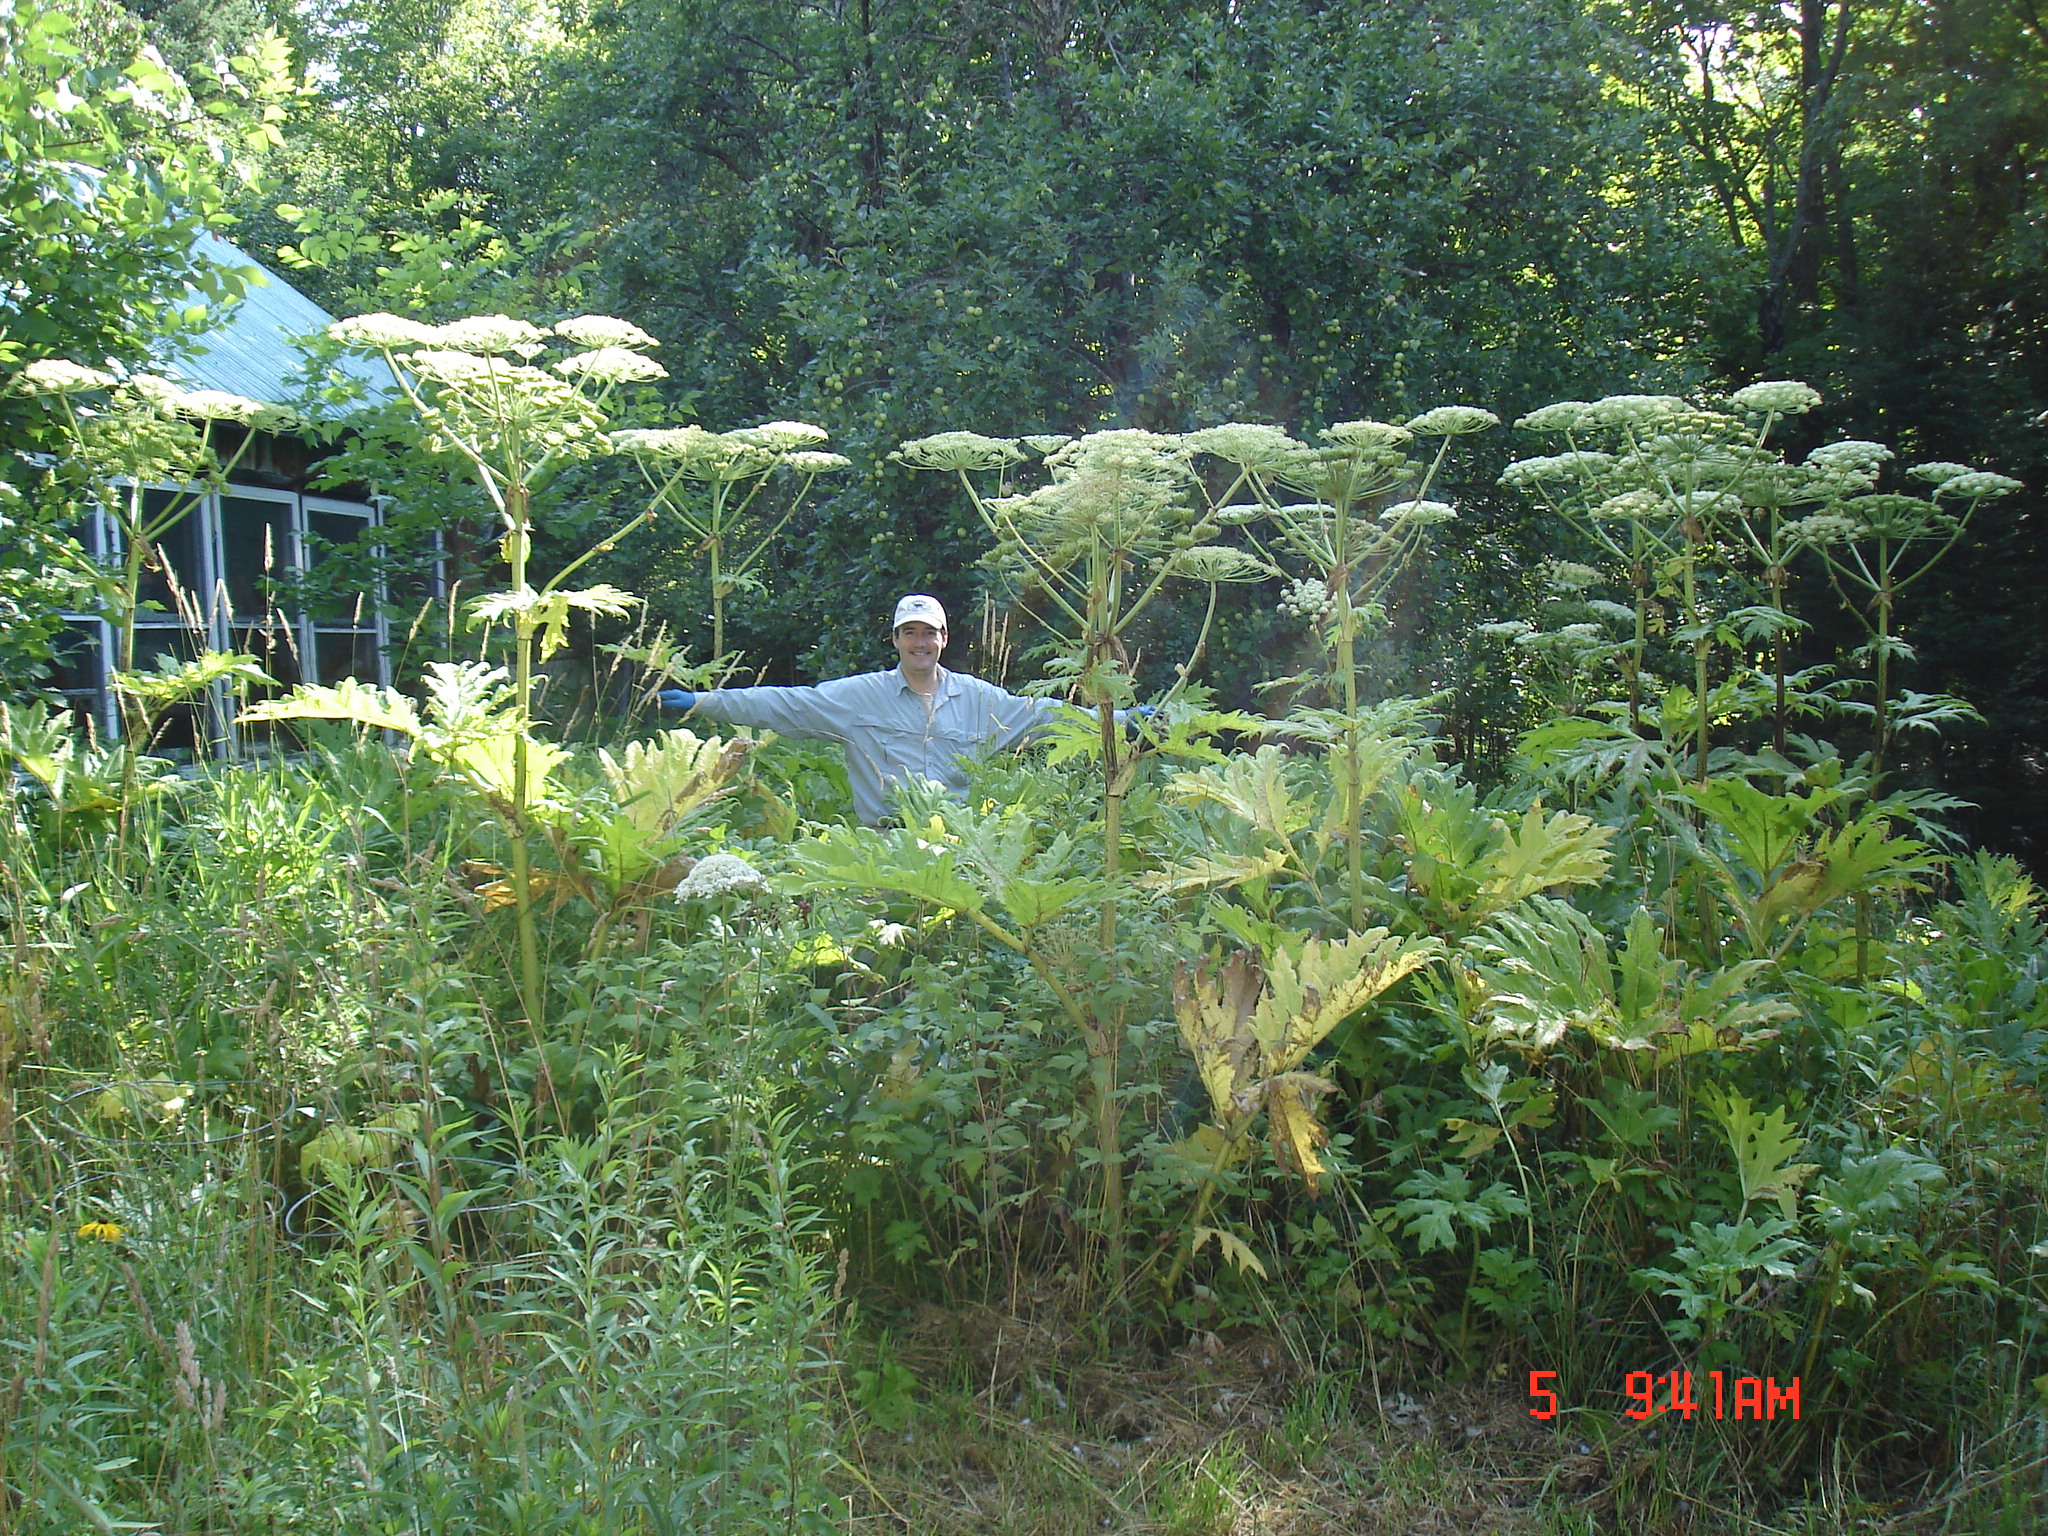 Person standing with giant hogweed towering over them.